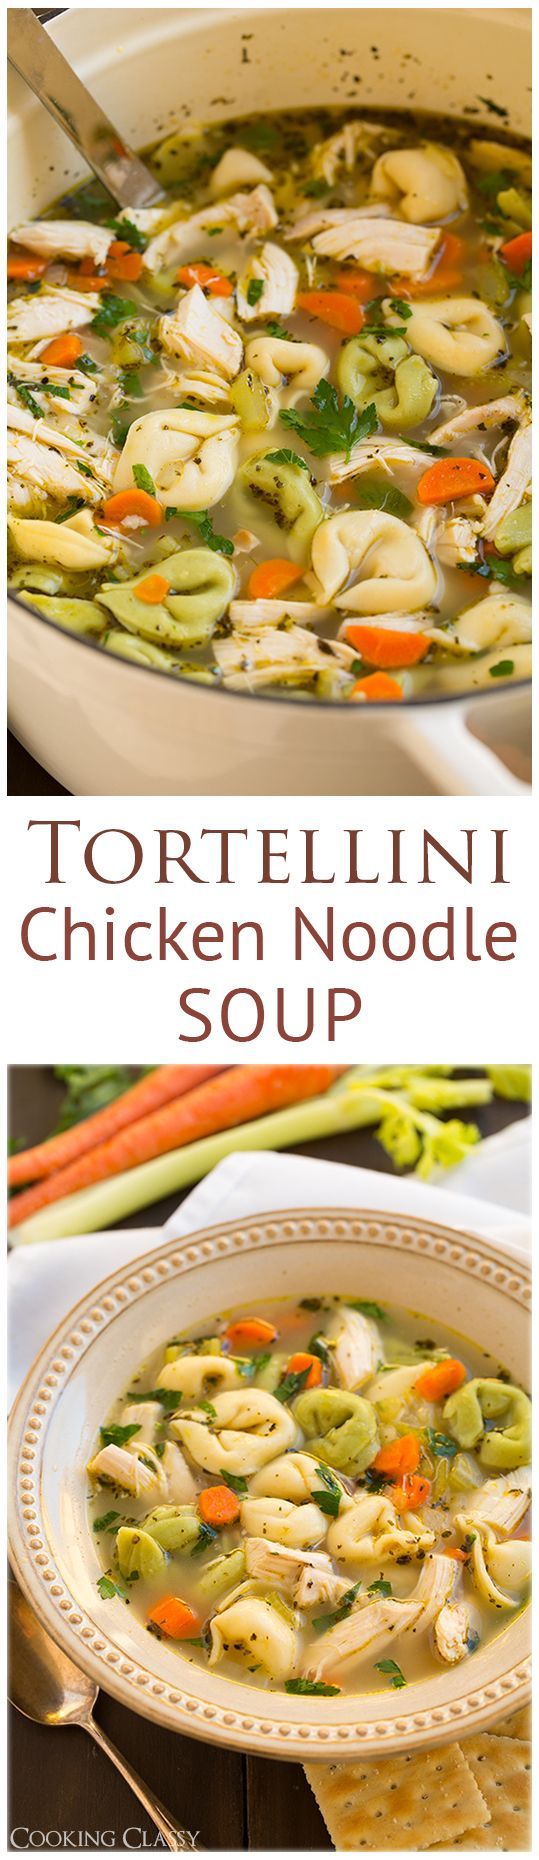 Tortellini Chicken Noodle Soup – this is so easy to make and seriously delicious! A simple 30 minute m